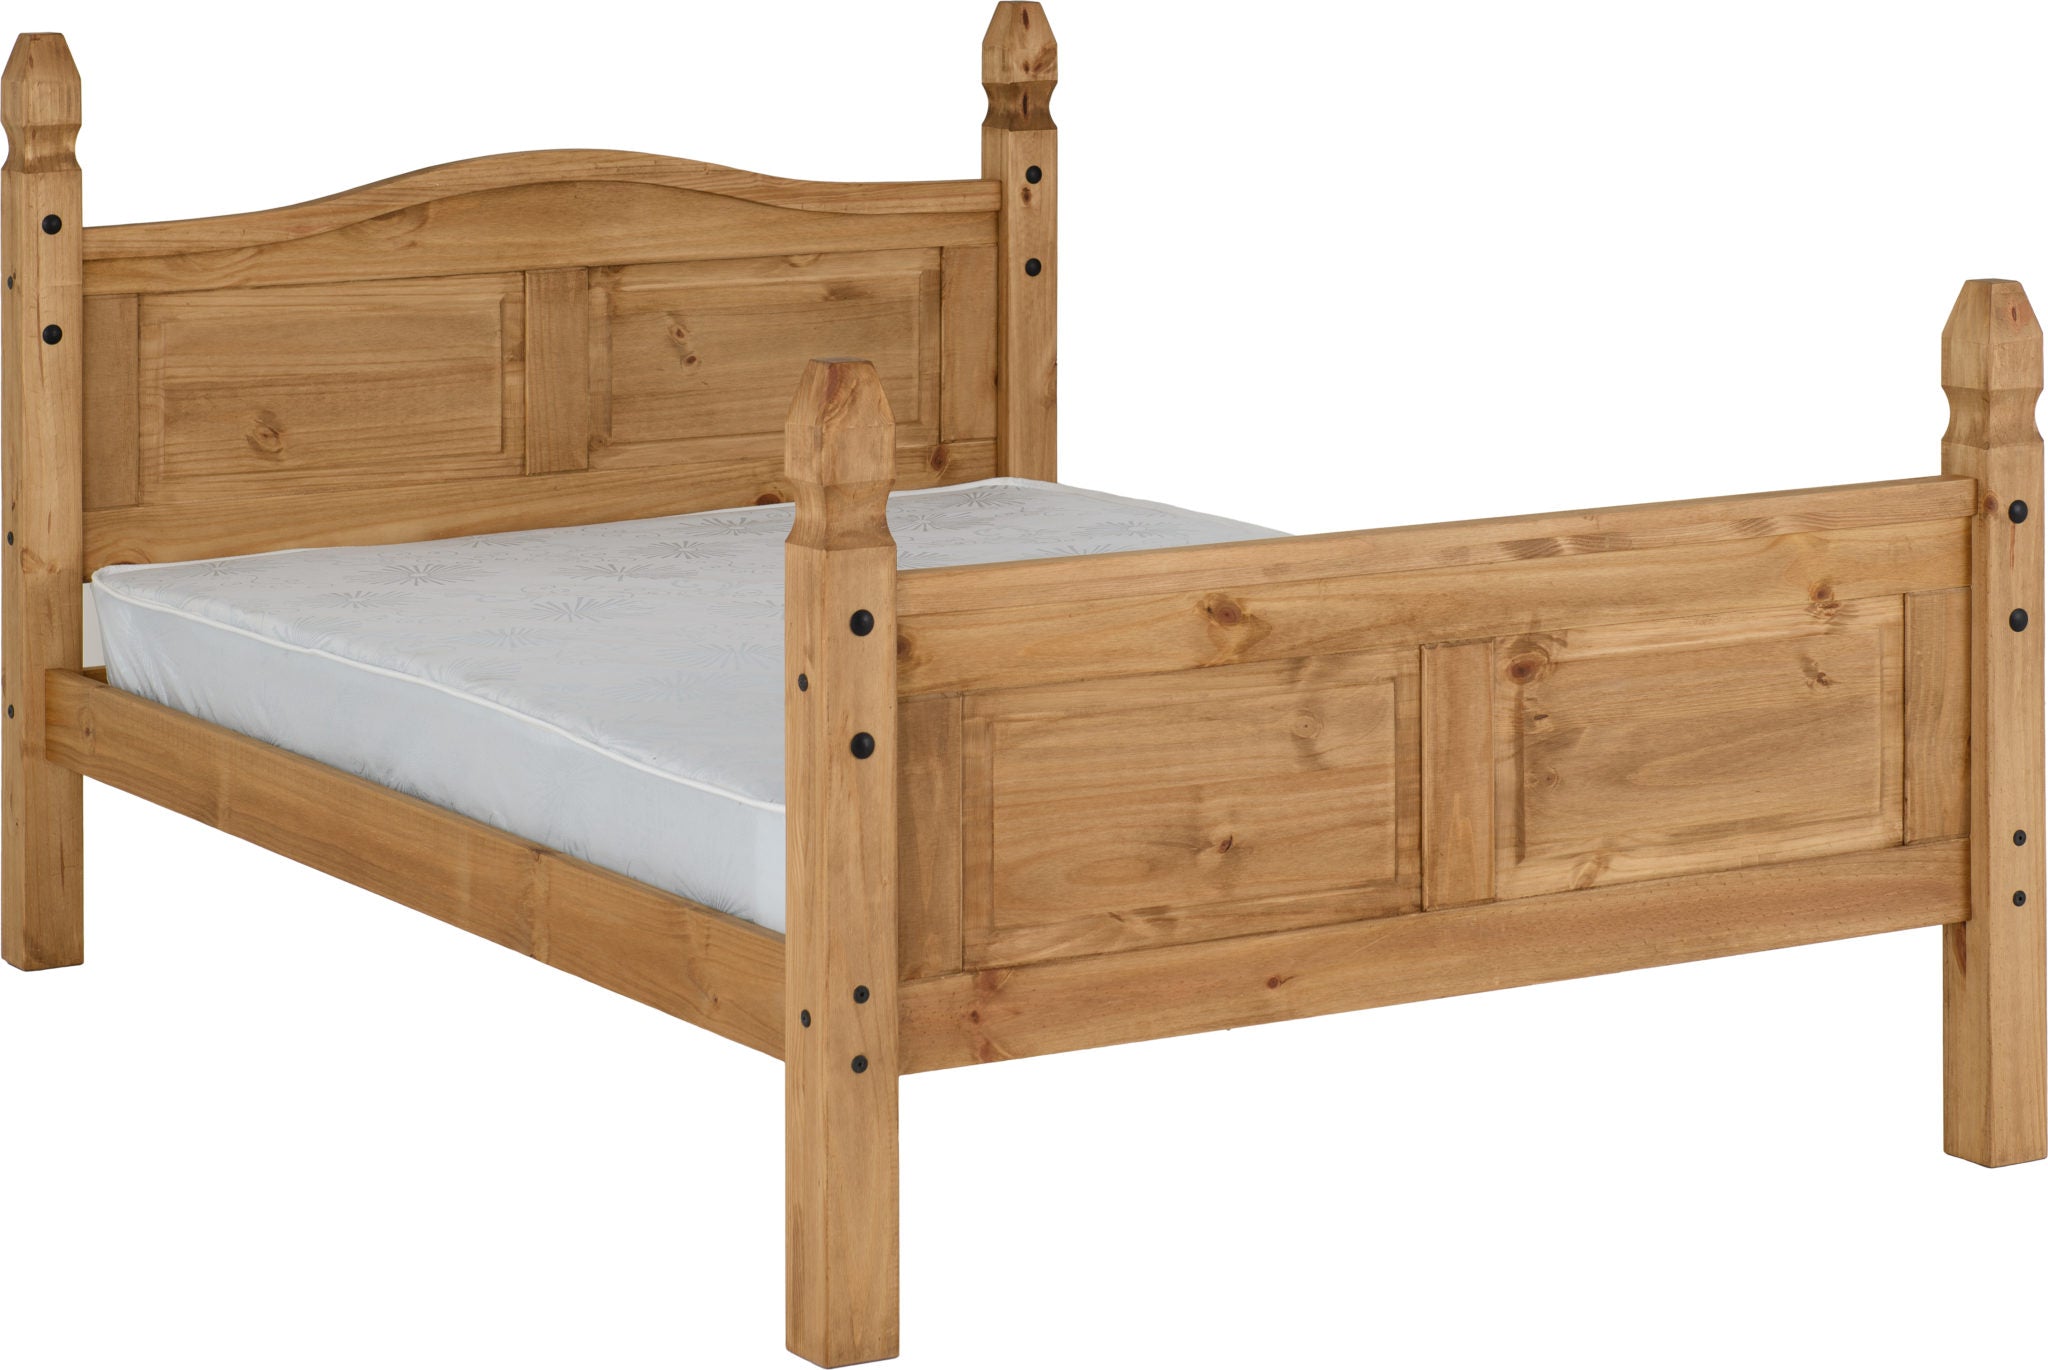 Corona 4'6" Bed High Foot End Distressed Waxed Pine